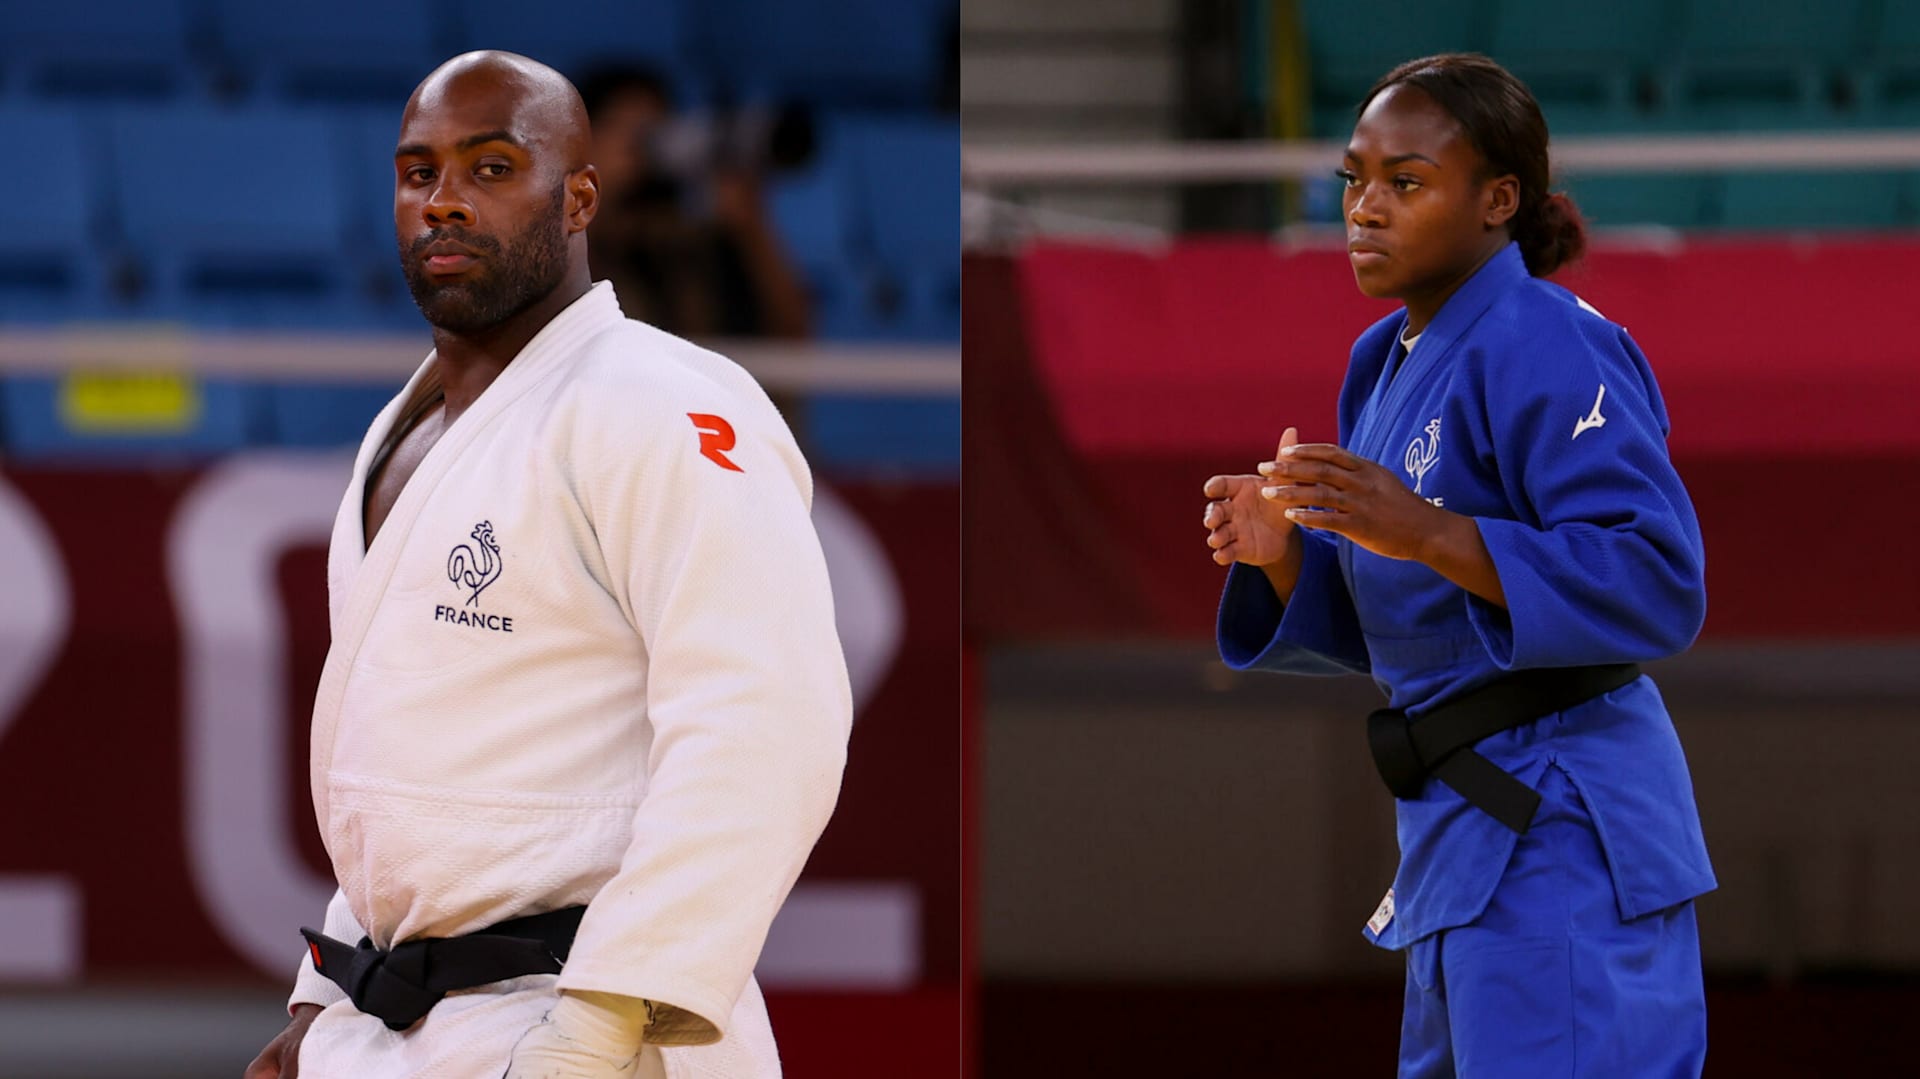 2023 Judo World Championships in Doha, Qatar Preview, schedule and how to watch